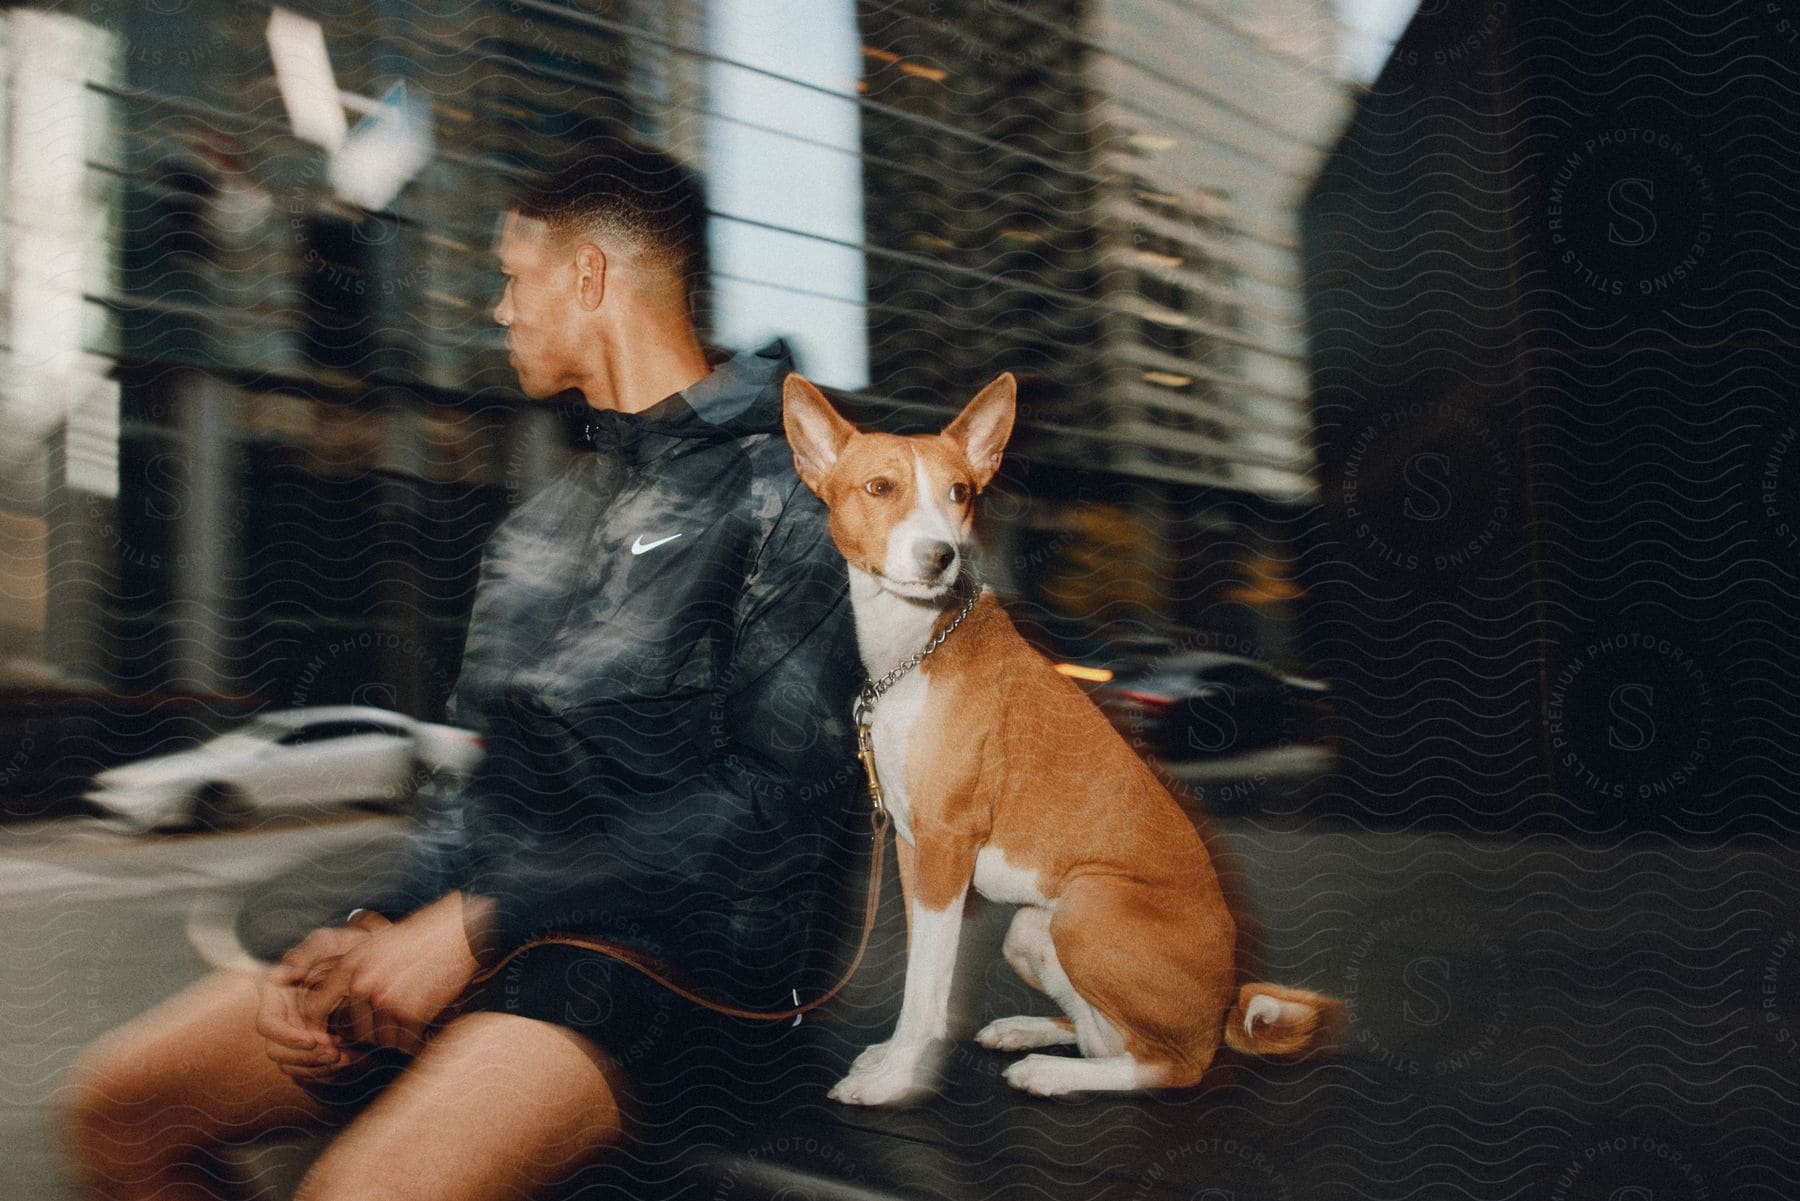 Man in sports jacket and dog sitting next to him on an urban sidewalk, with modern buildings in the background and a blurred motion effect around.